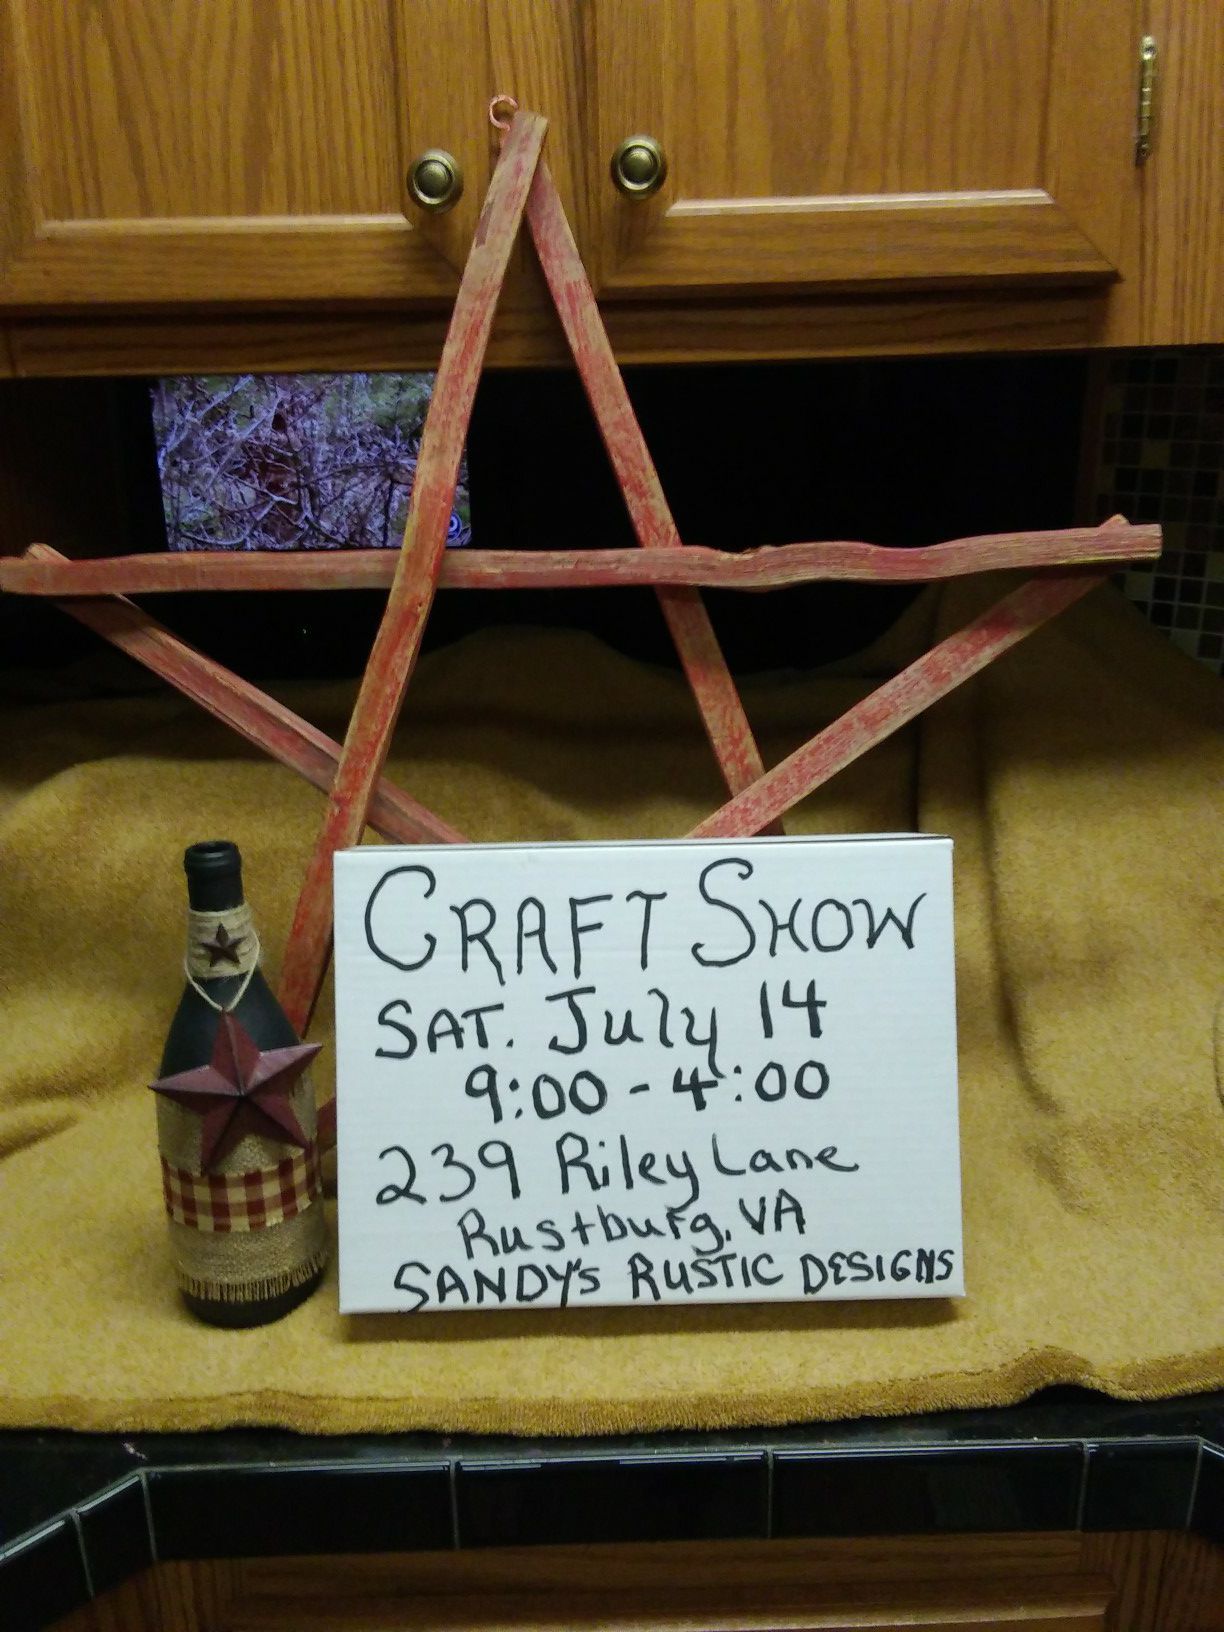 Craft Show for Sandy's Rustic Designs